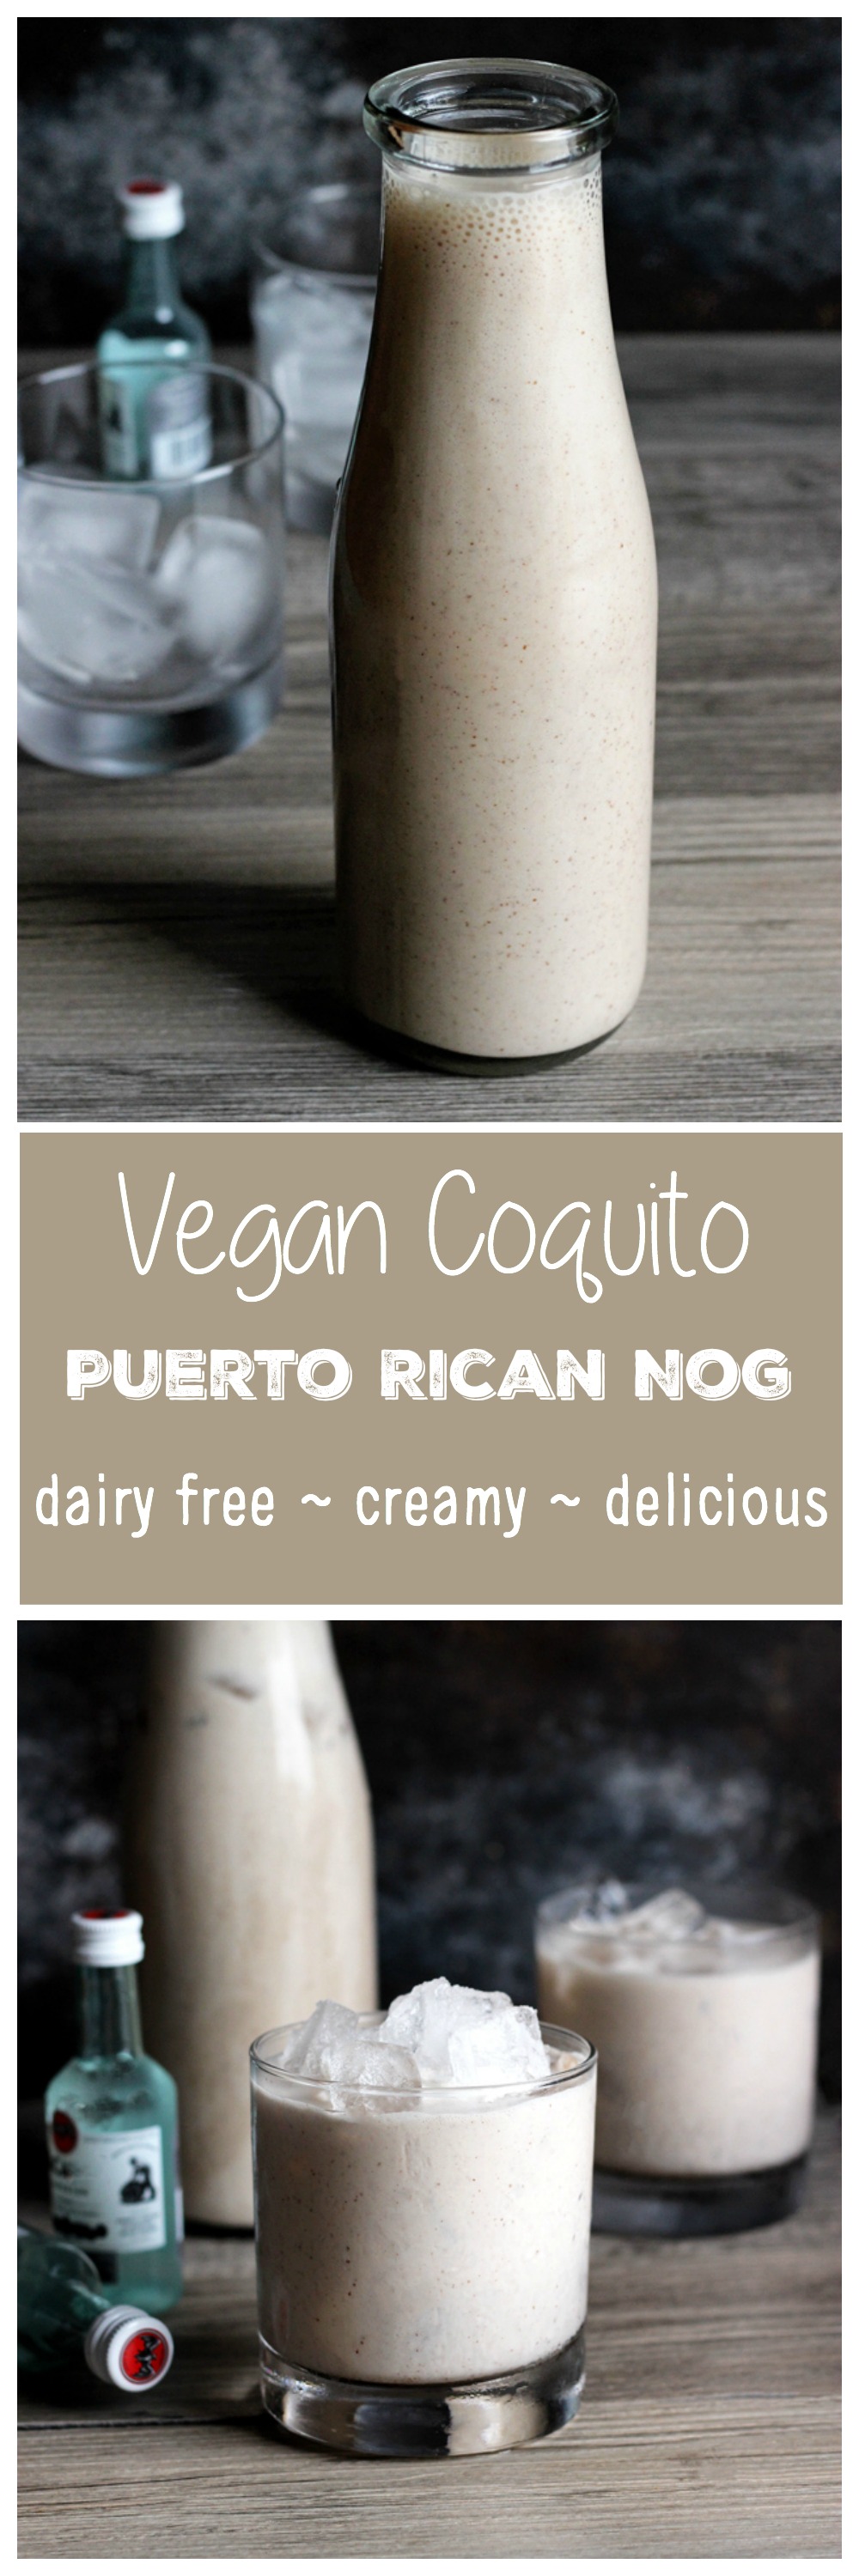 Vegan Coquito - A traditional Puerto Rican egg nog-like alcoholic beverage that's dairy free, creamy and sweet, just like the real thing. NeuroticMommy.com #vegan #holidays #beverages